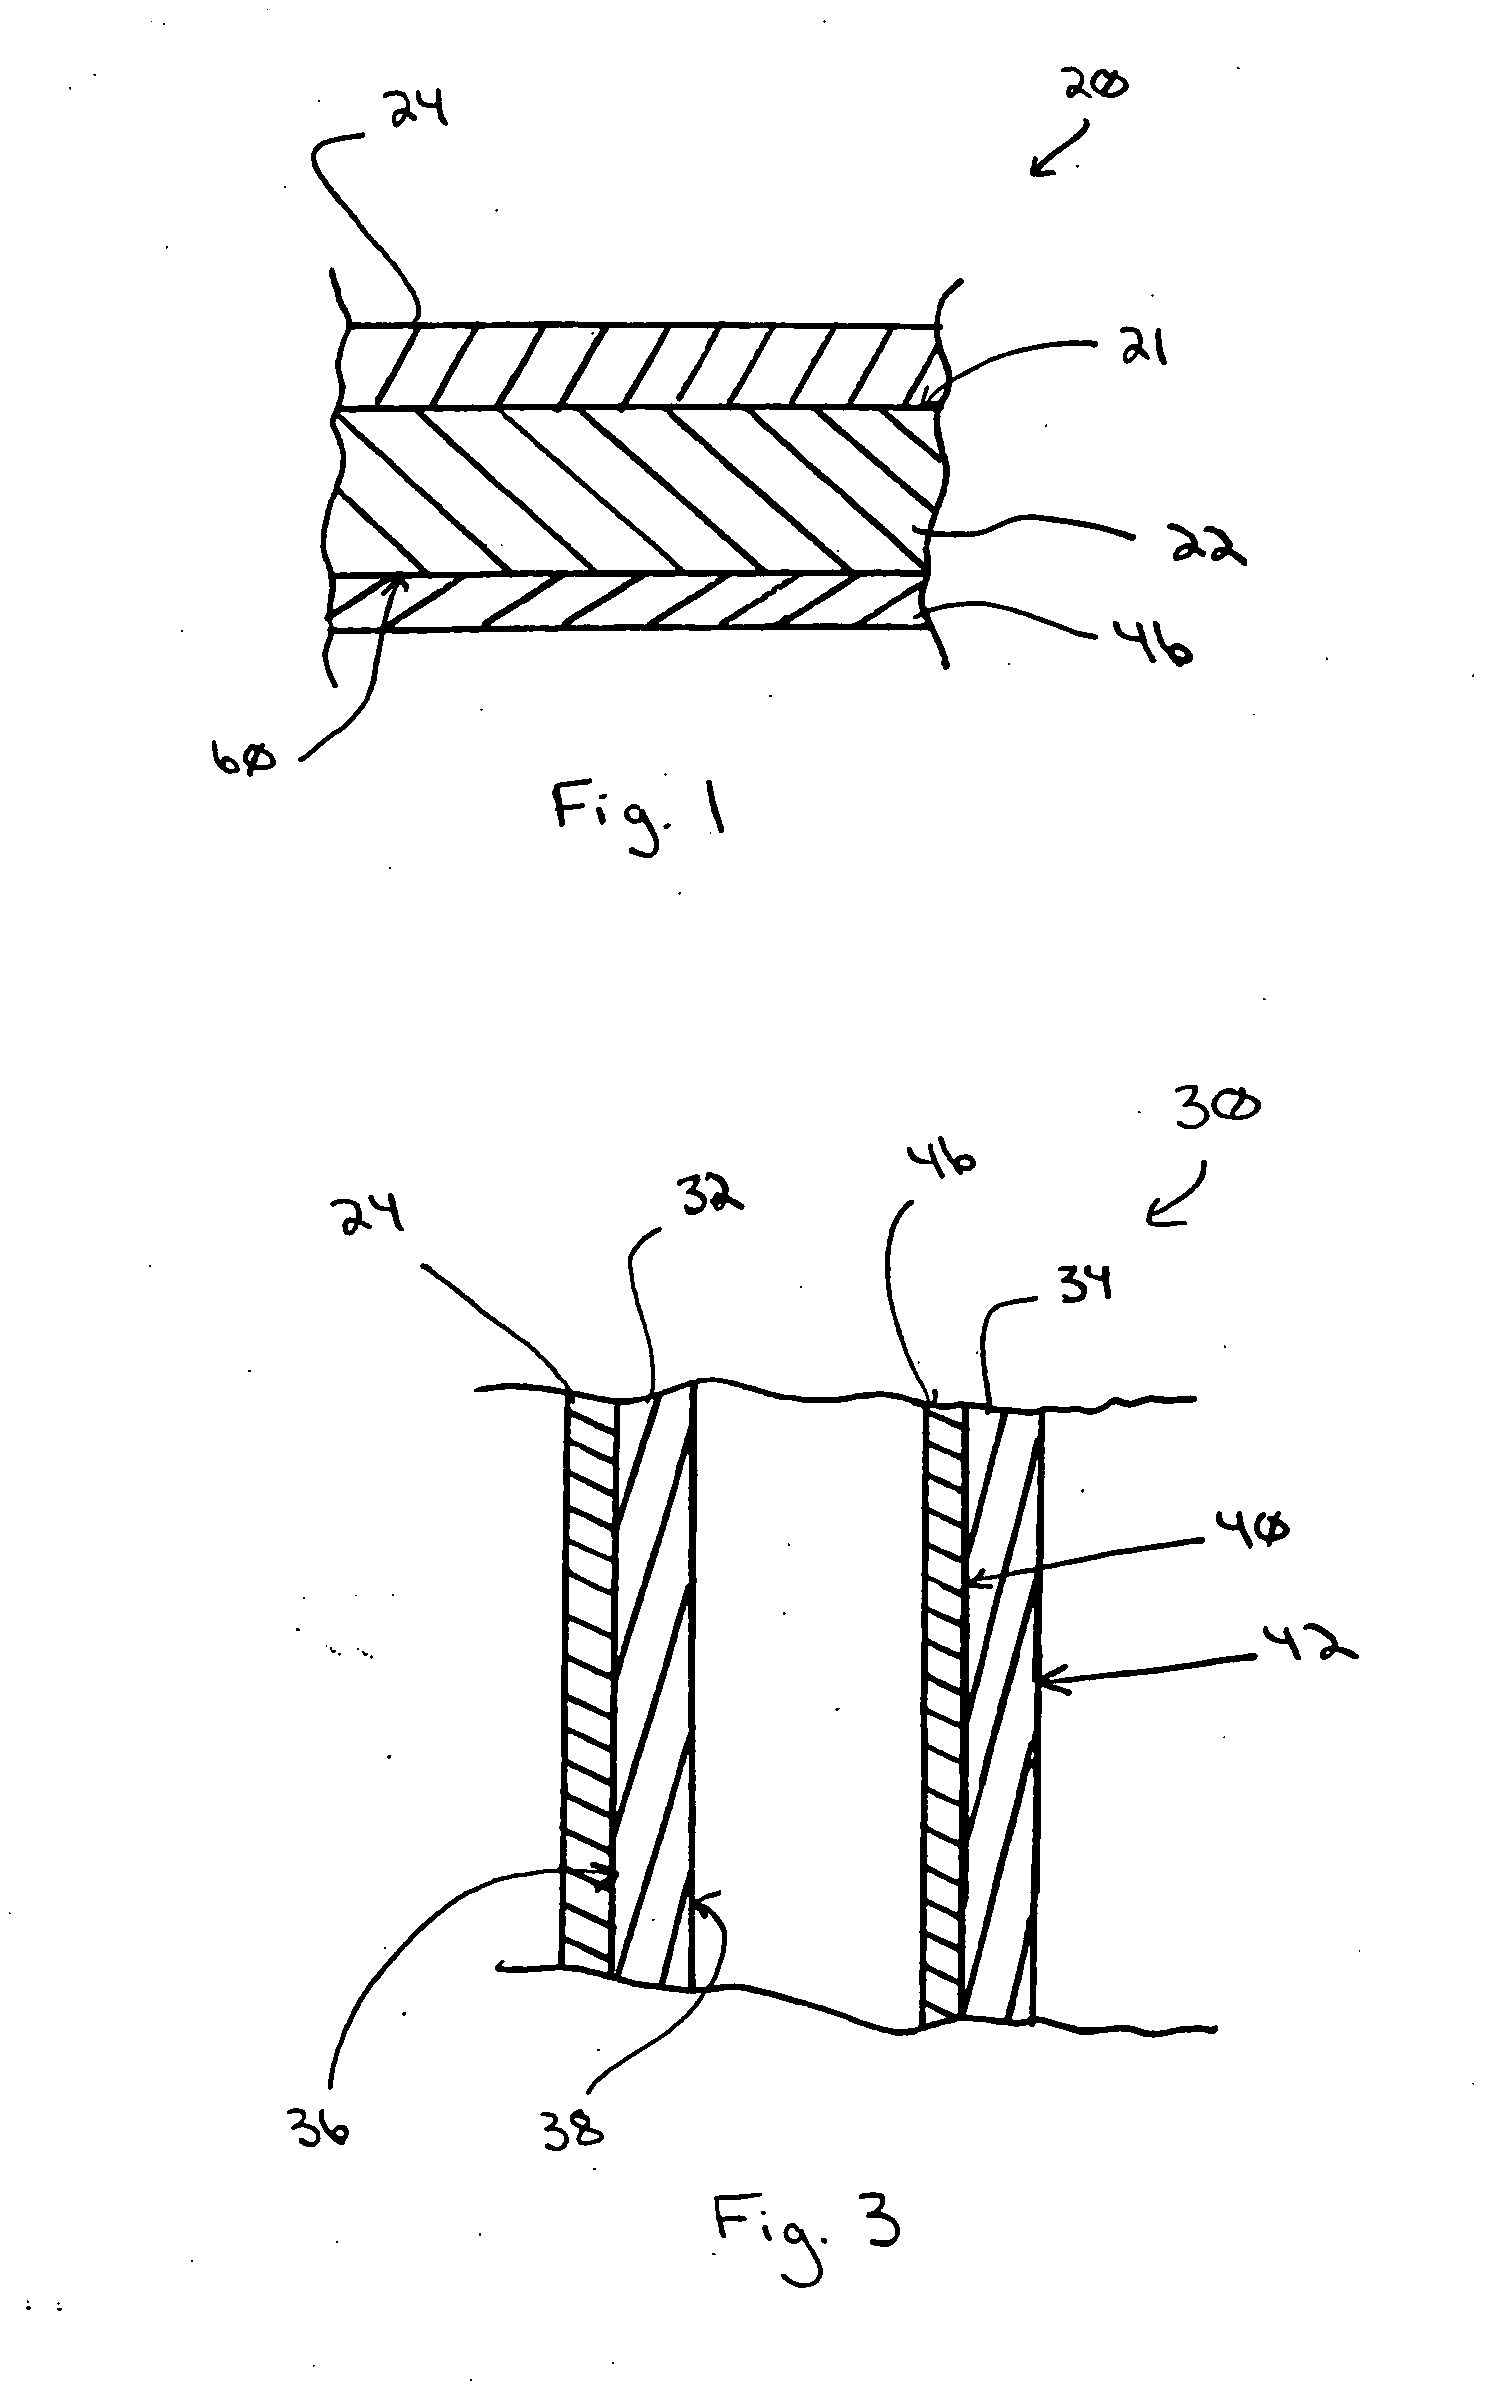 Photo-induced hydrophilic article and method of making same